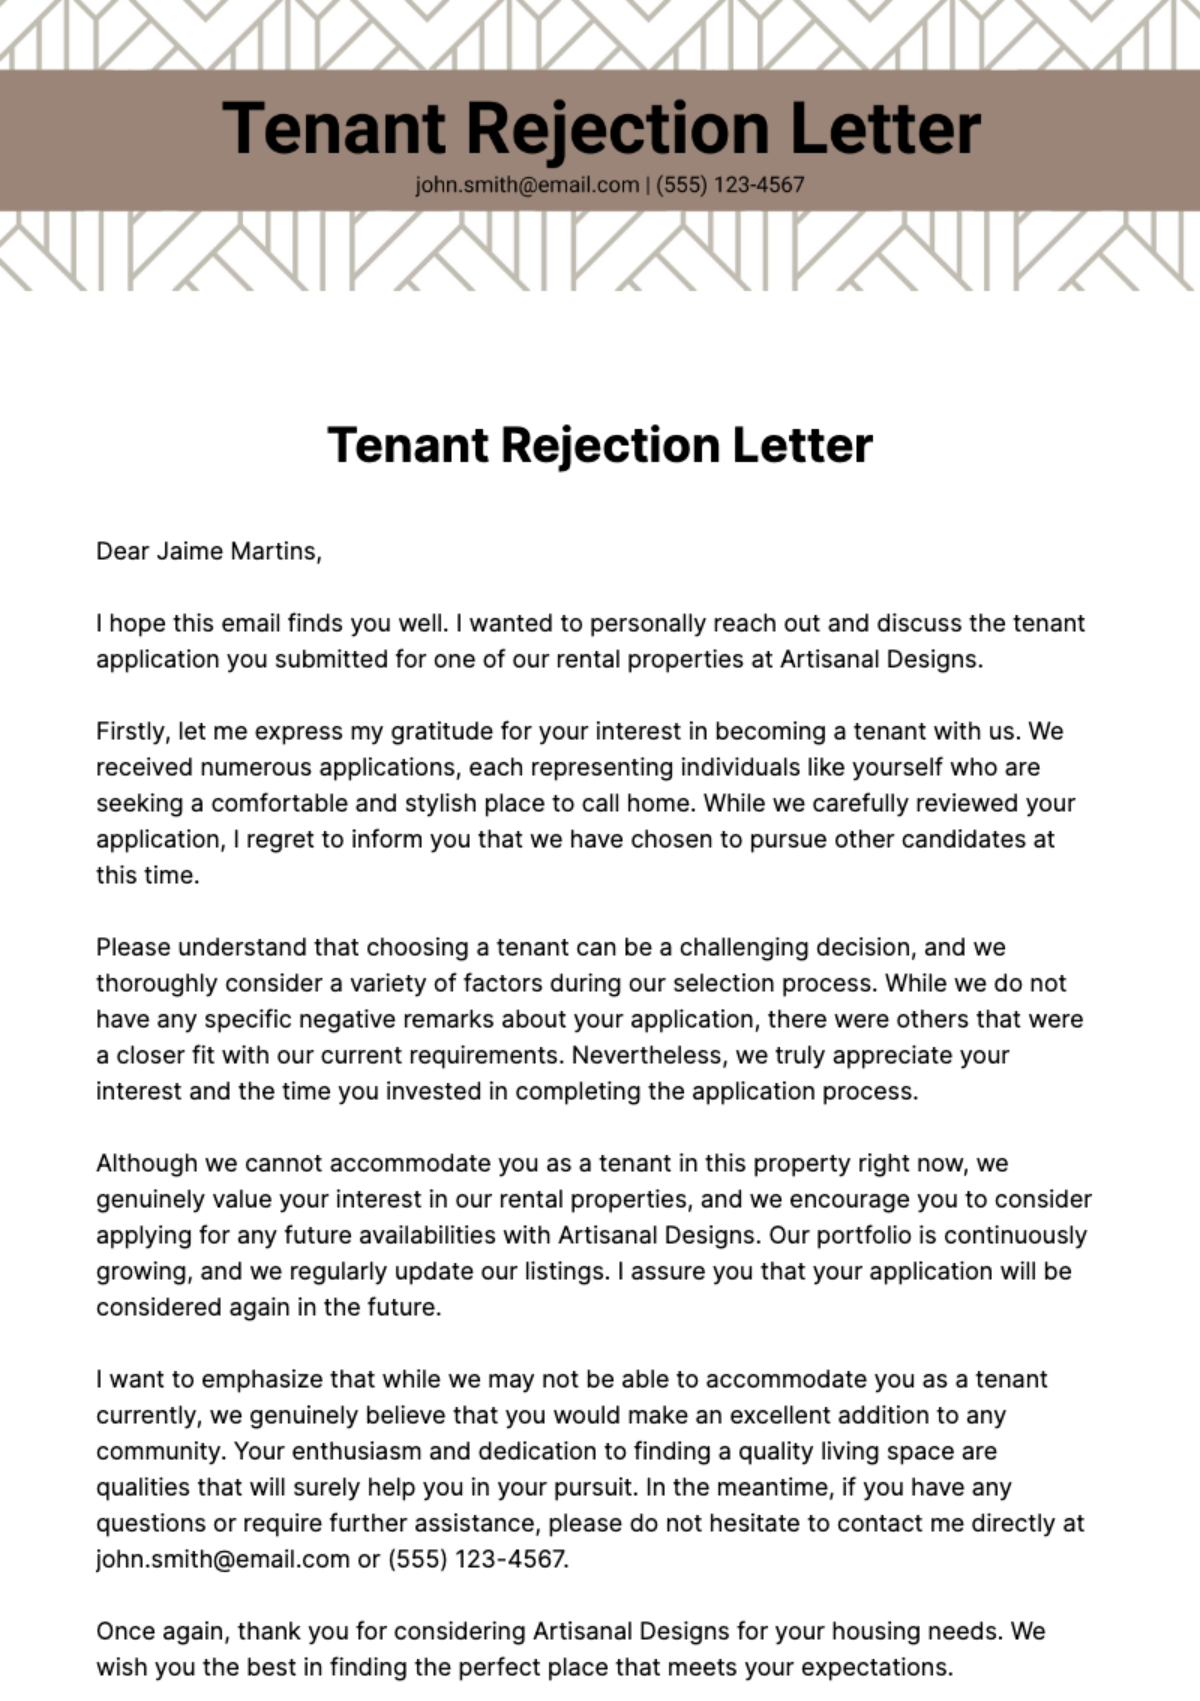 Free Tenant Rejection Letter Template